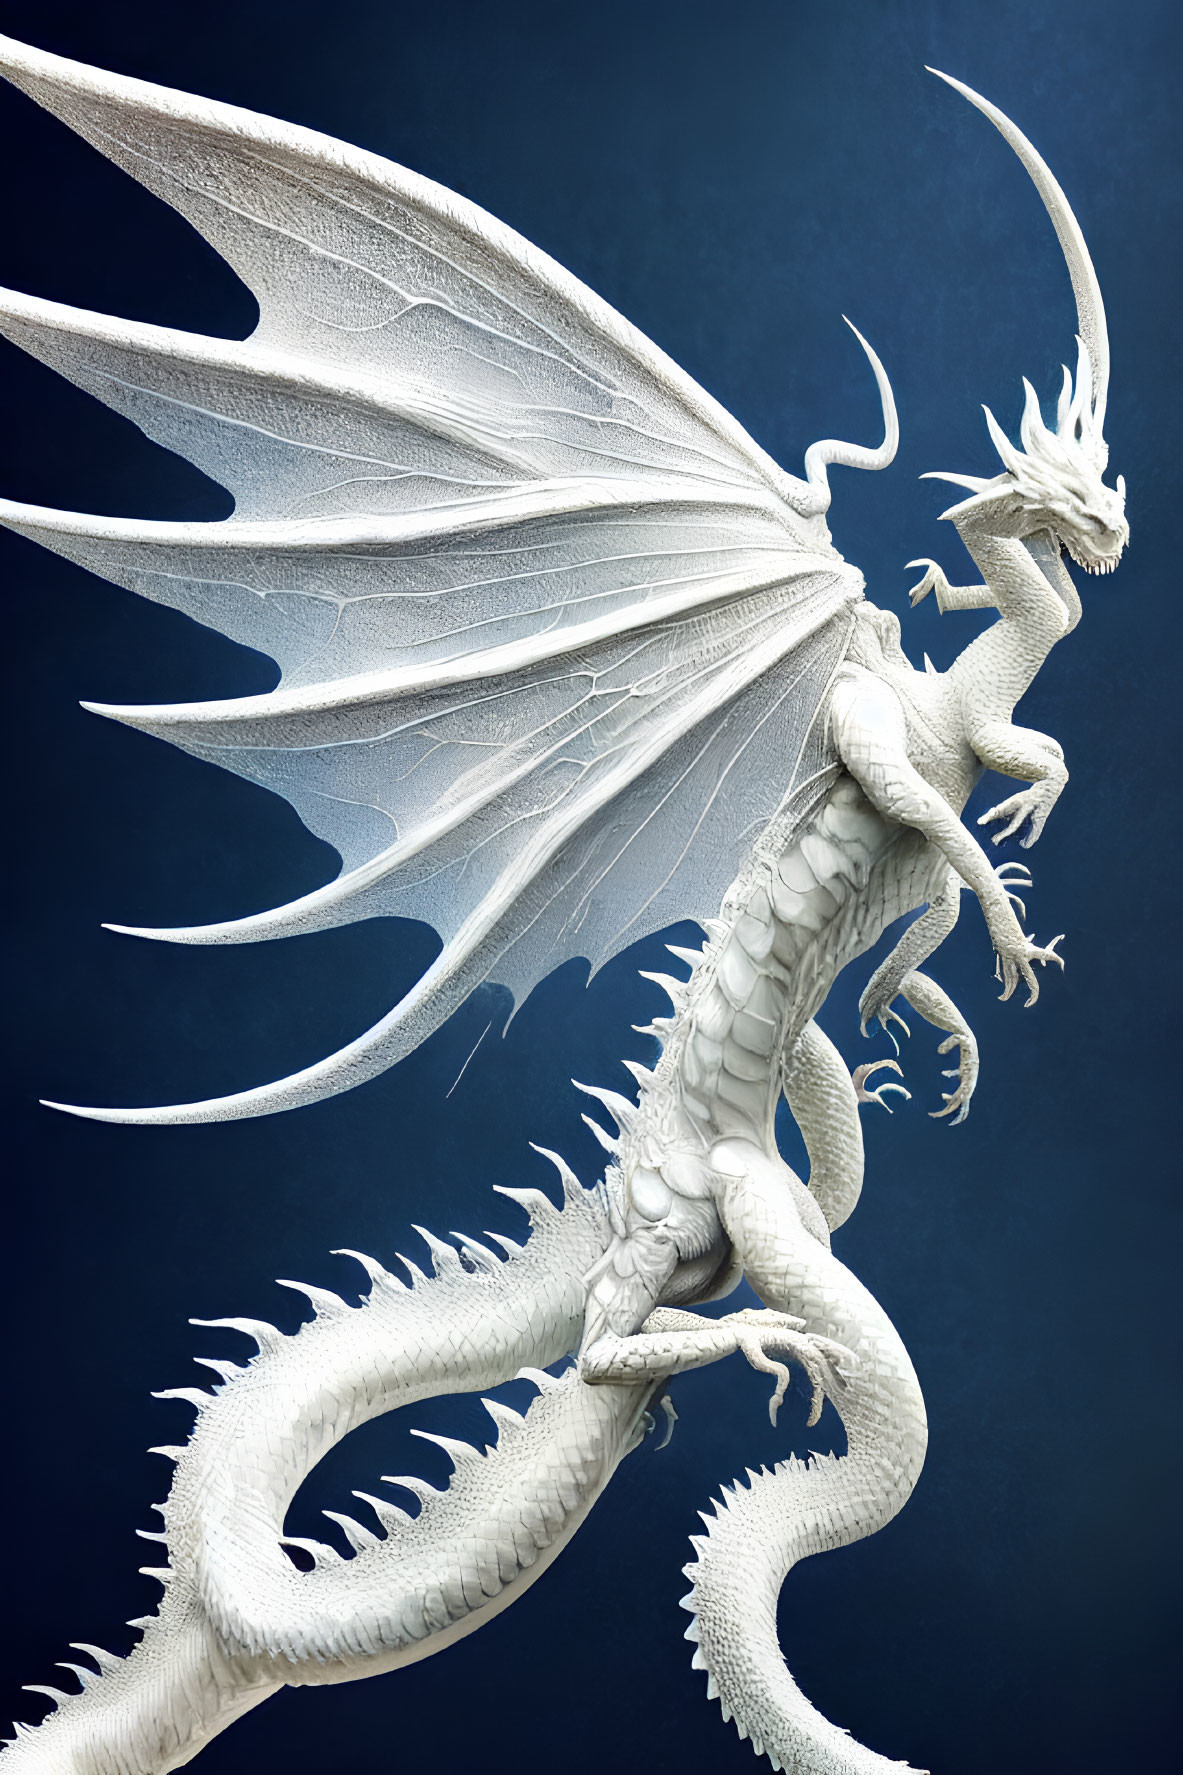 White dragon with expansive wings and intricate horned head on dark blue background